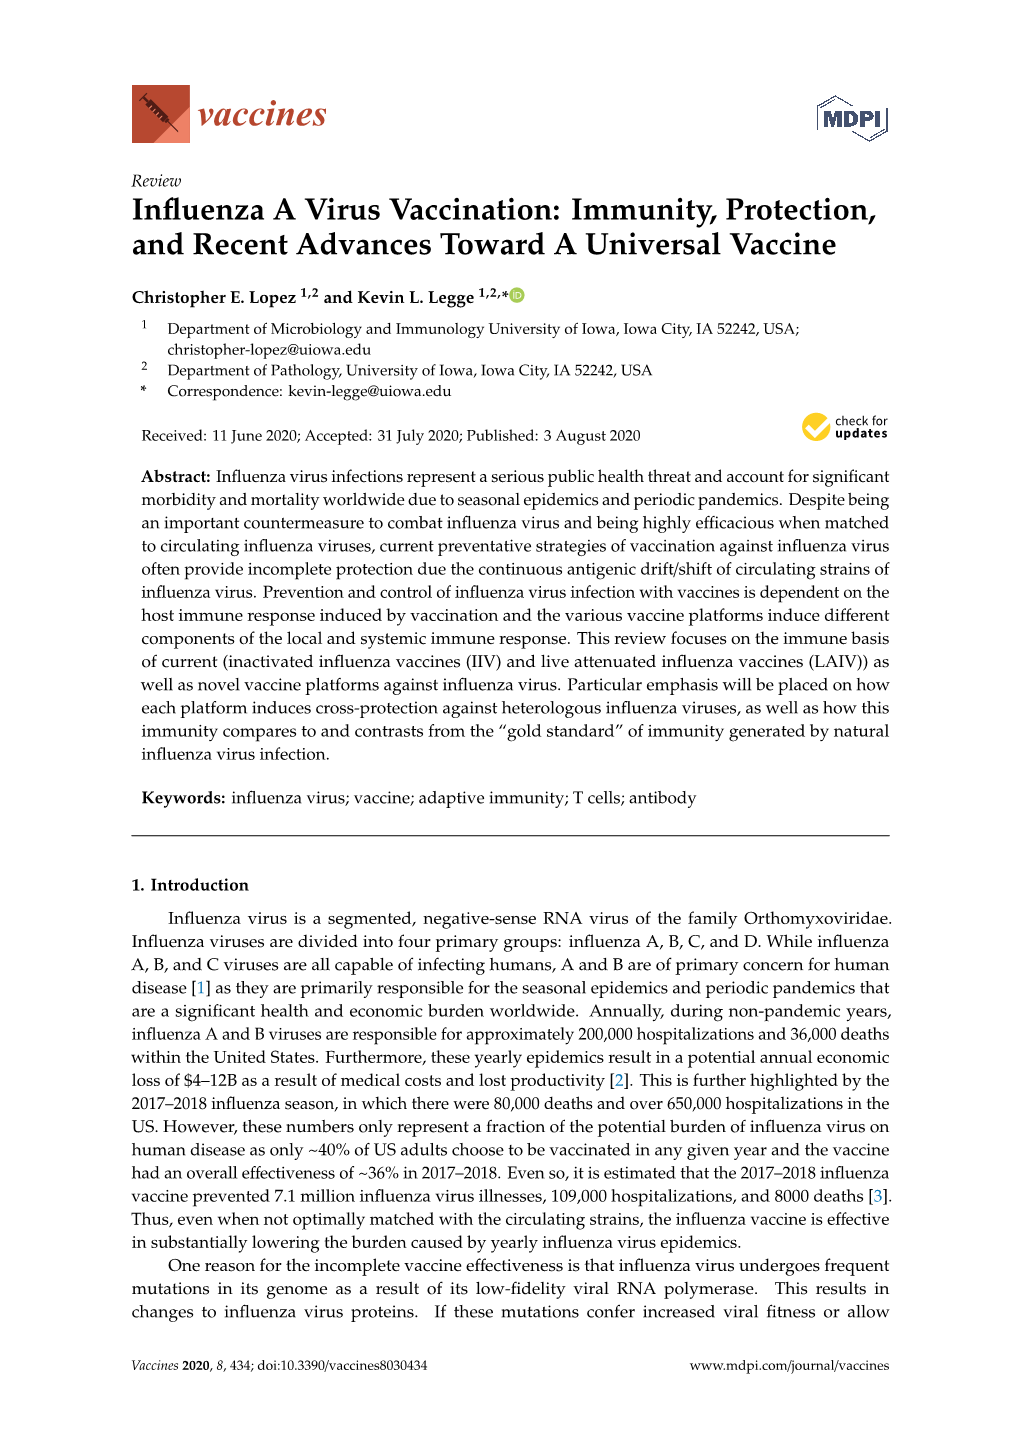 Influenza a Virus Vaccination: Immunity, Protection, and Recent